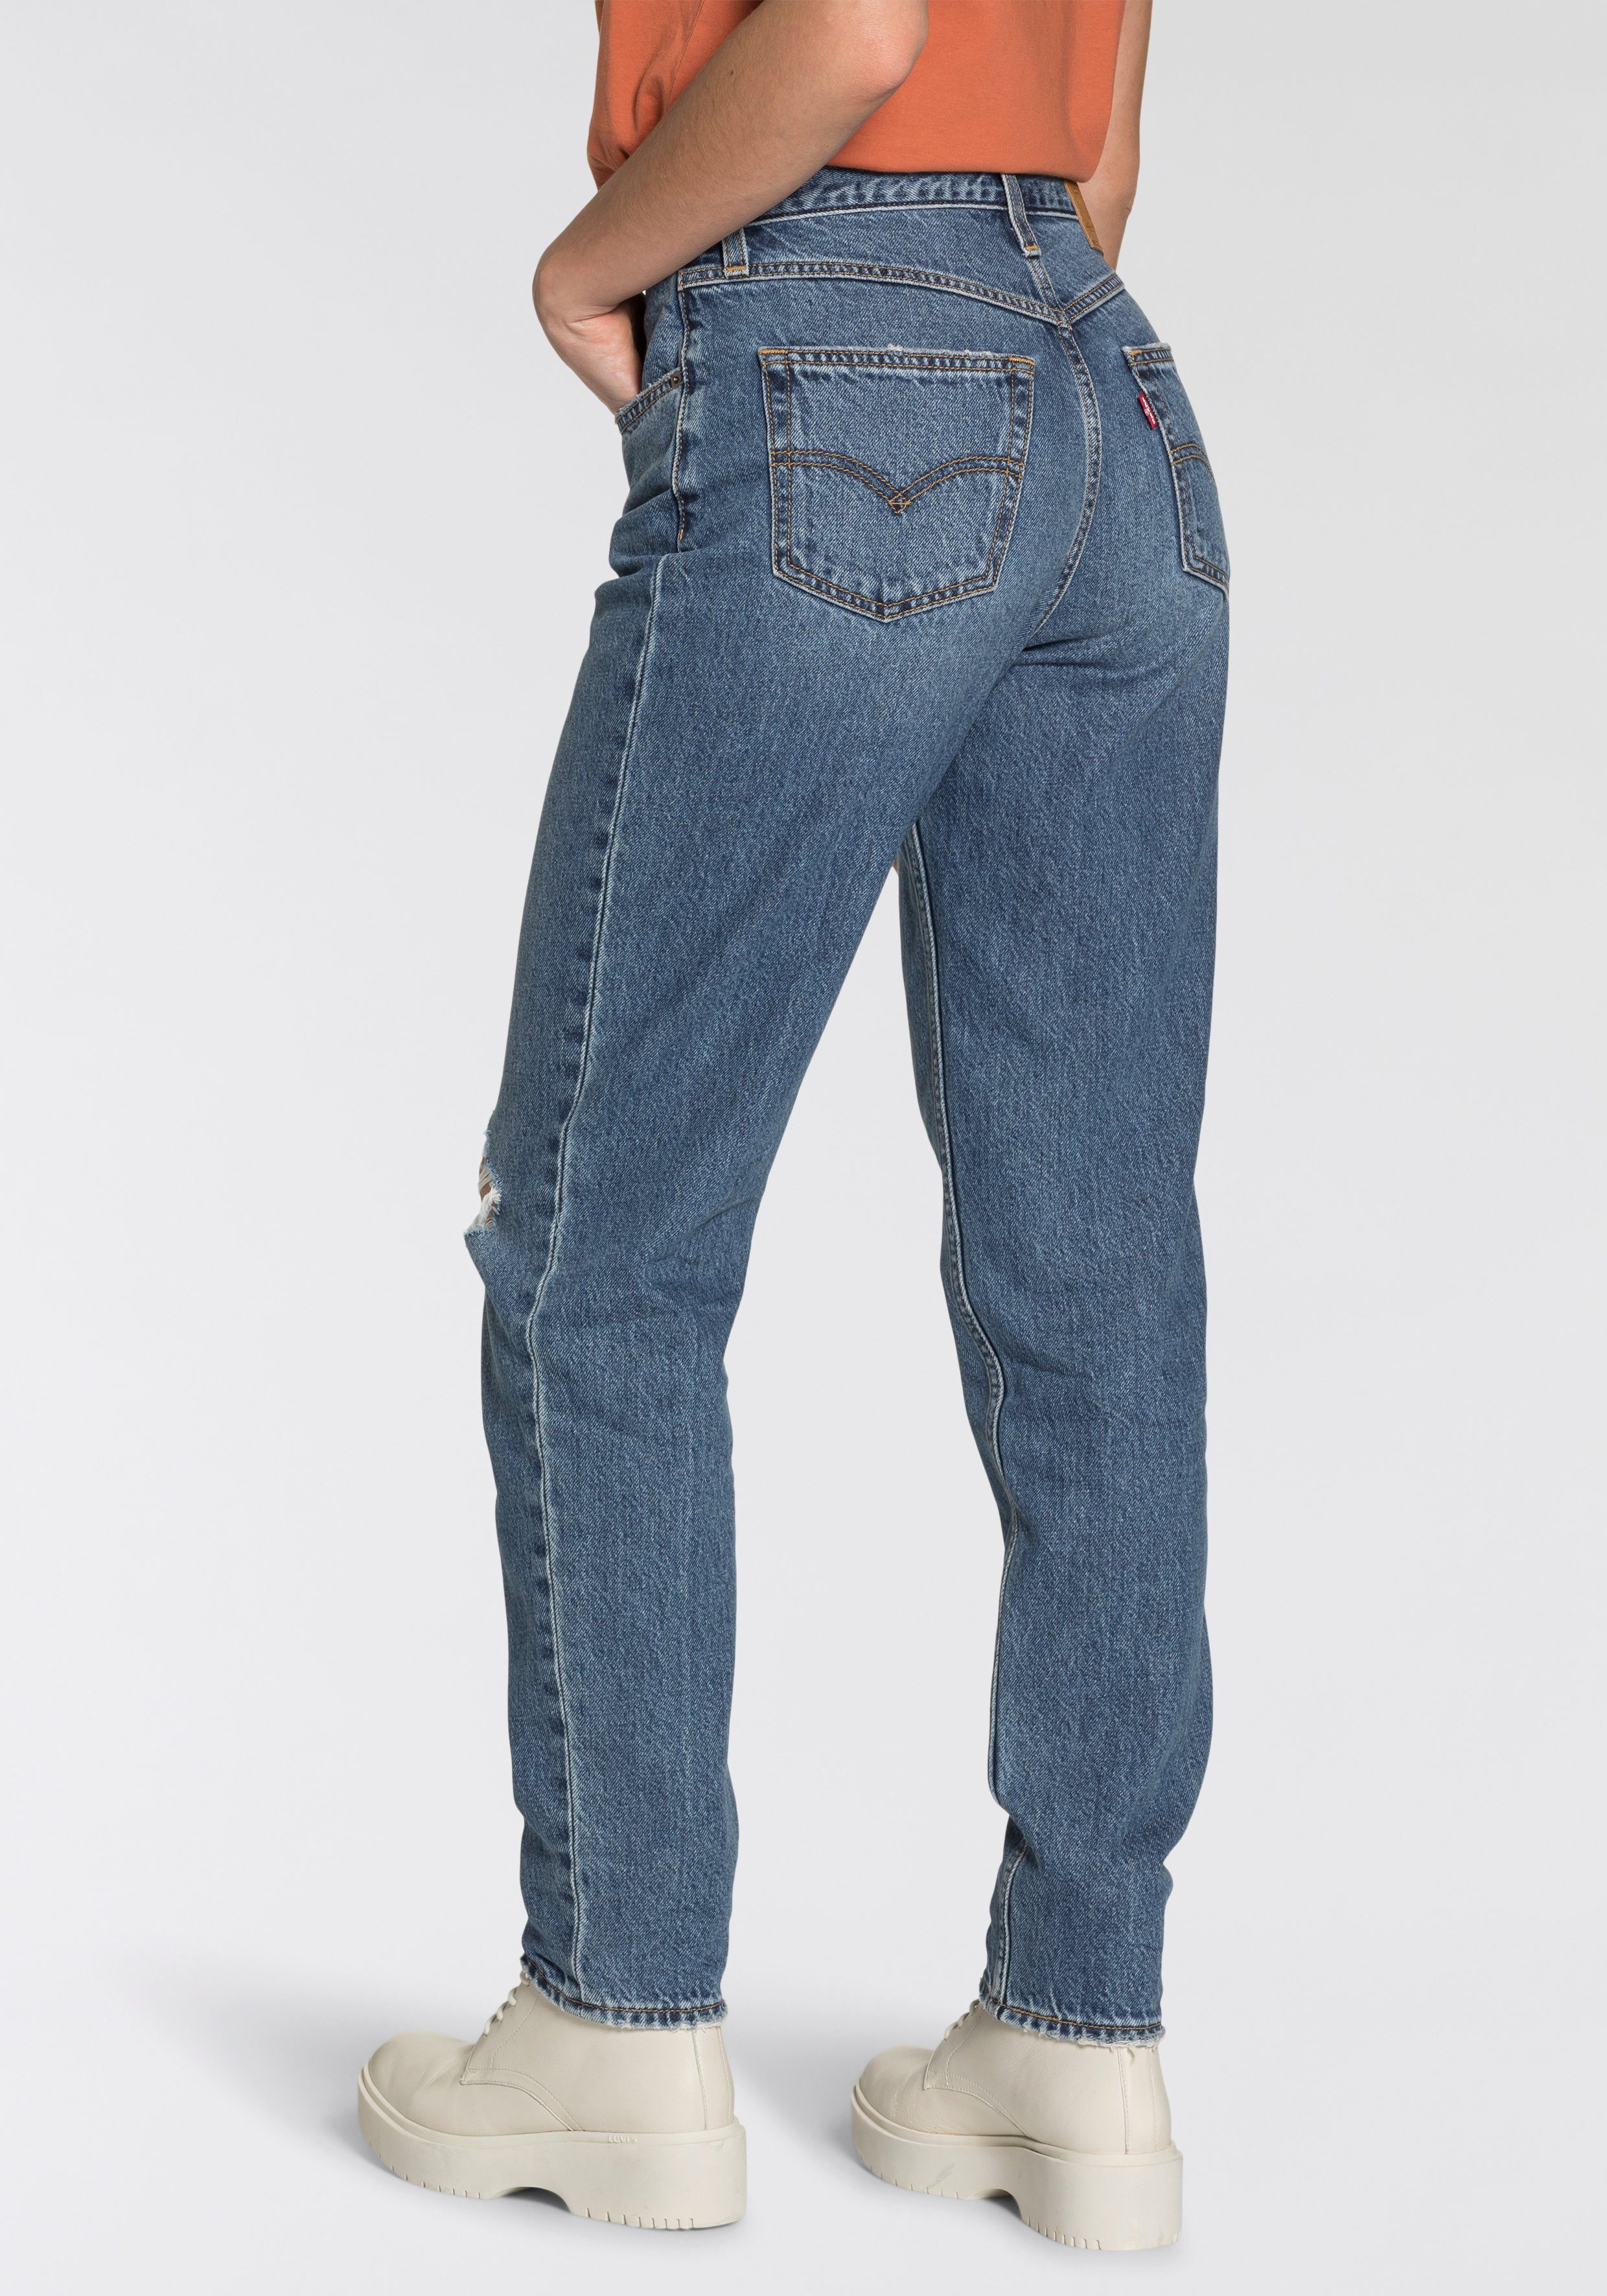 denim Levi's® JEANS 80S Mom-Jeans mid-blue MOM